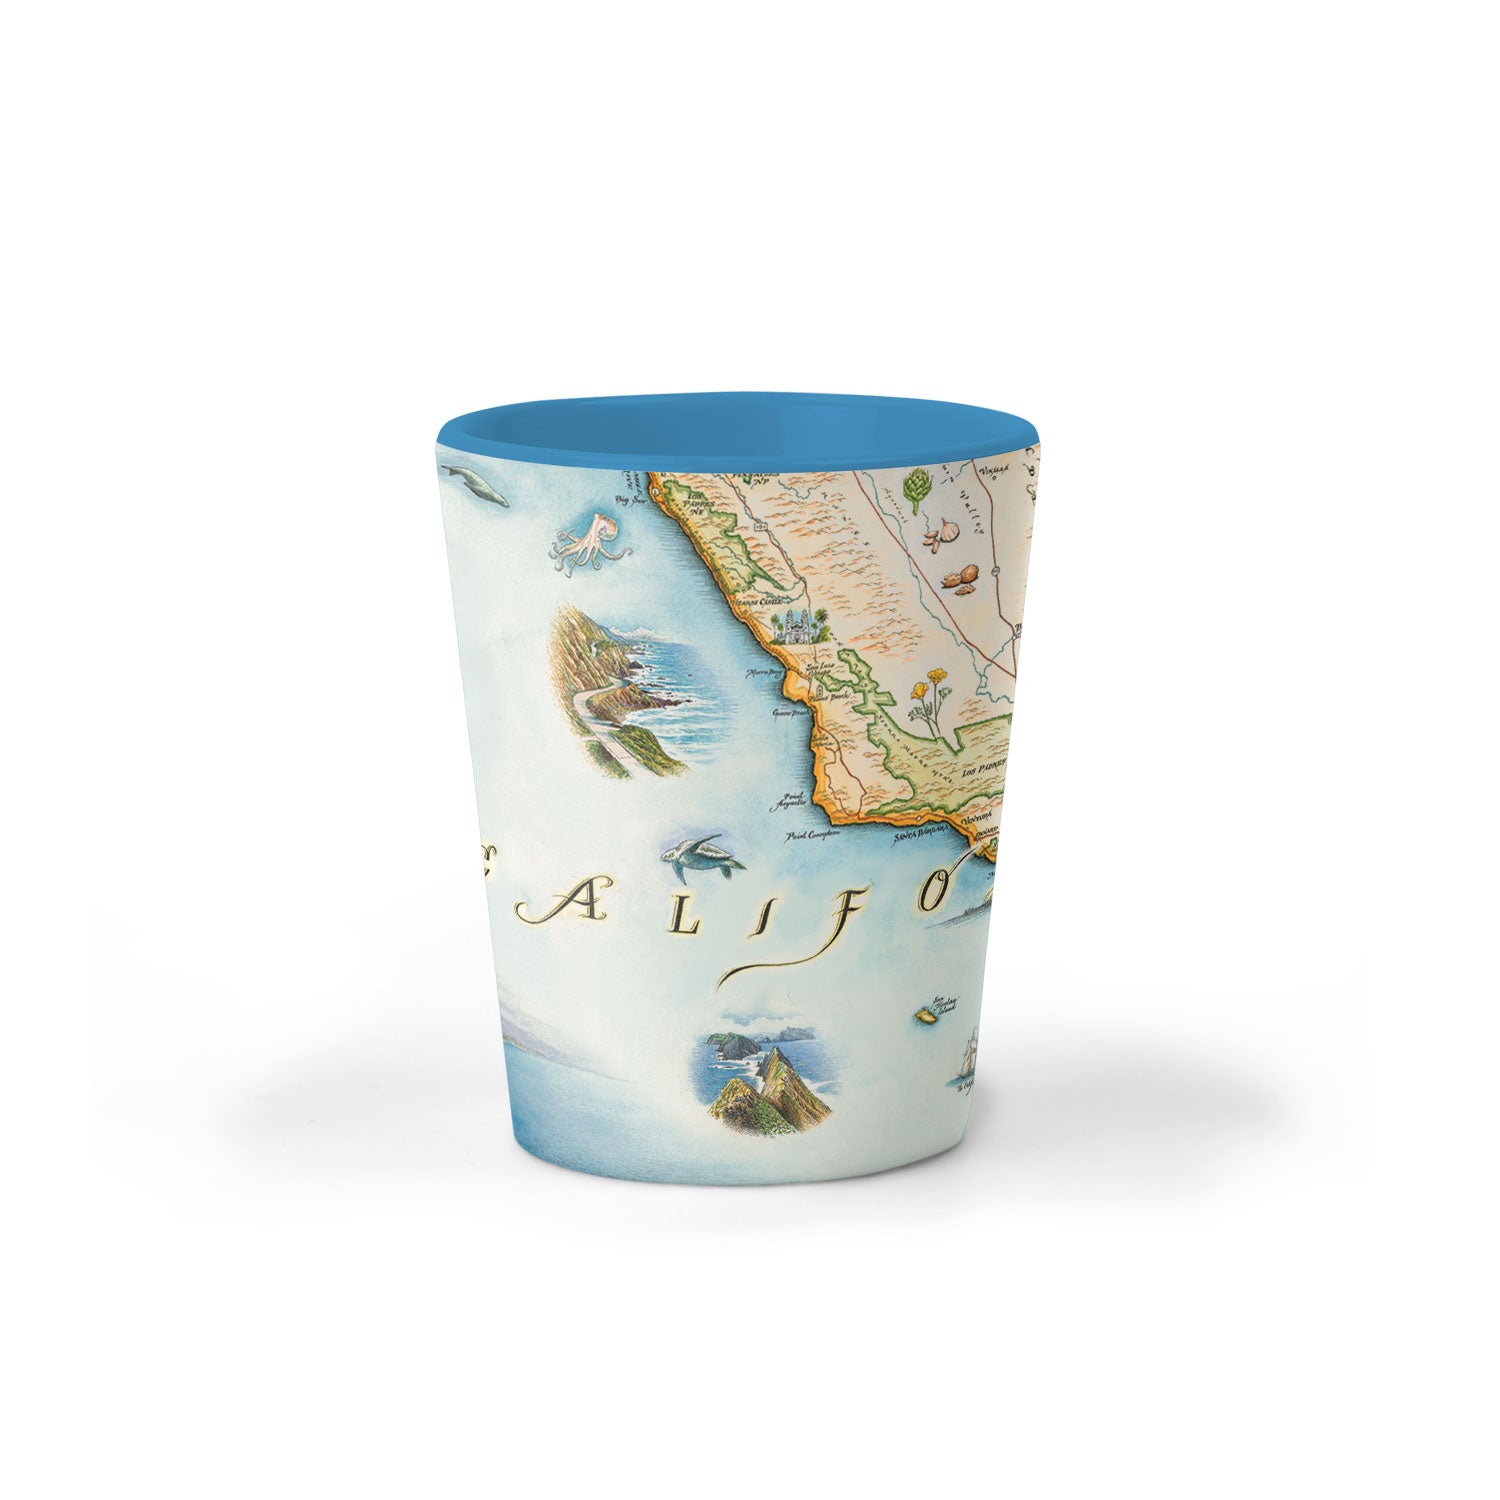 Southern California State Map Ceramic shot glass by Xplorer Maps. Featuring turtles, islands, an octopus, artichokes, and fish. 